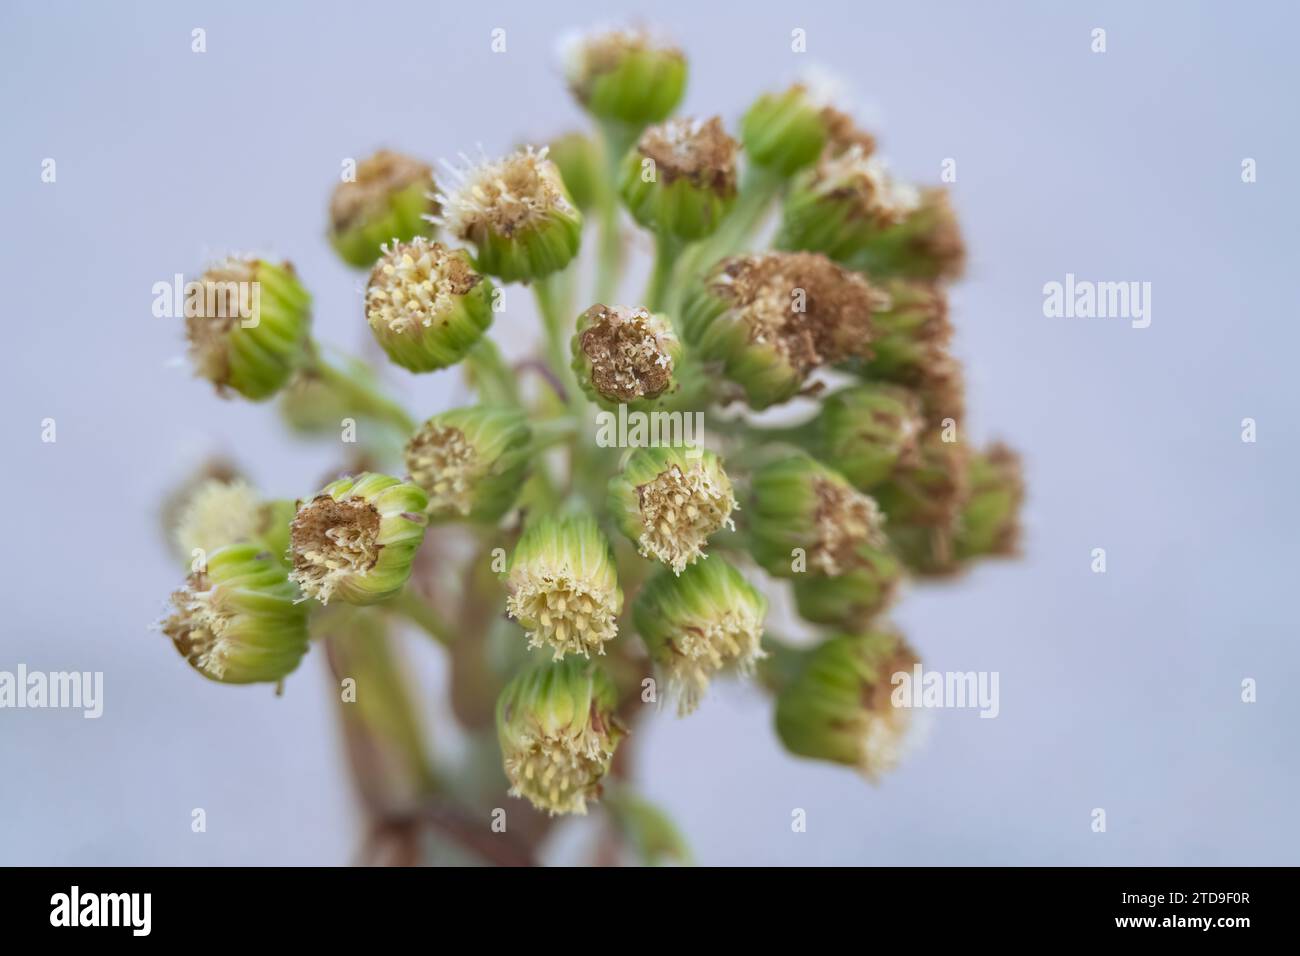 The inflorescence of a wooly butterbur in its natural environment, Curonian Spit, Kaliningrad region, Russia Stock Photo